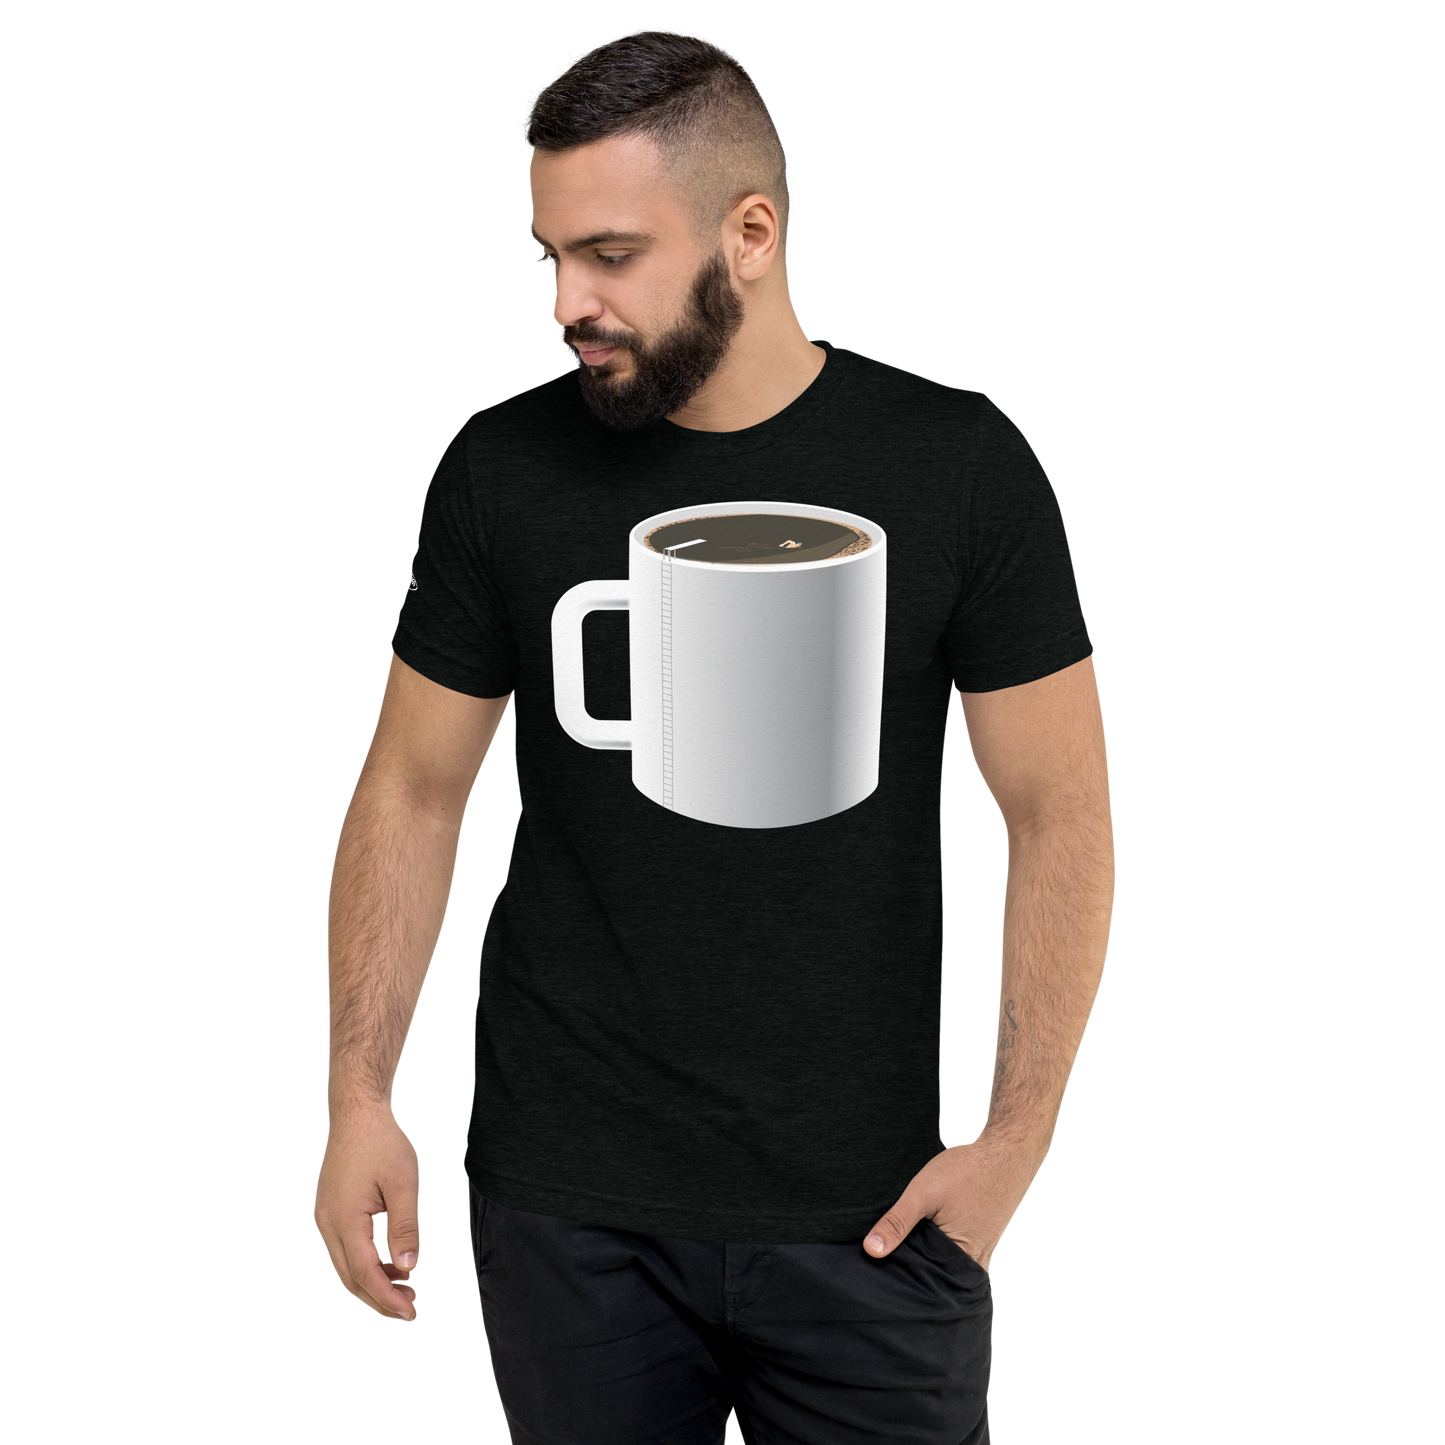 Coffee Cup Swimming Pool - Funny t-shirt